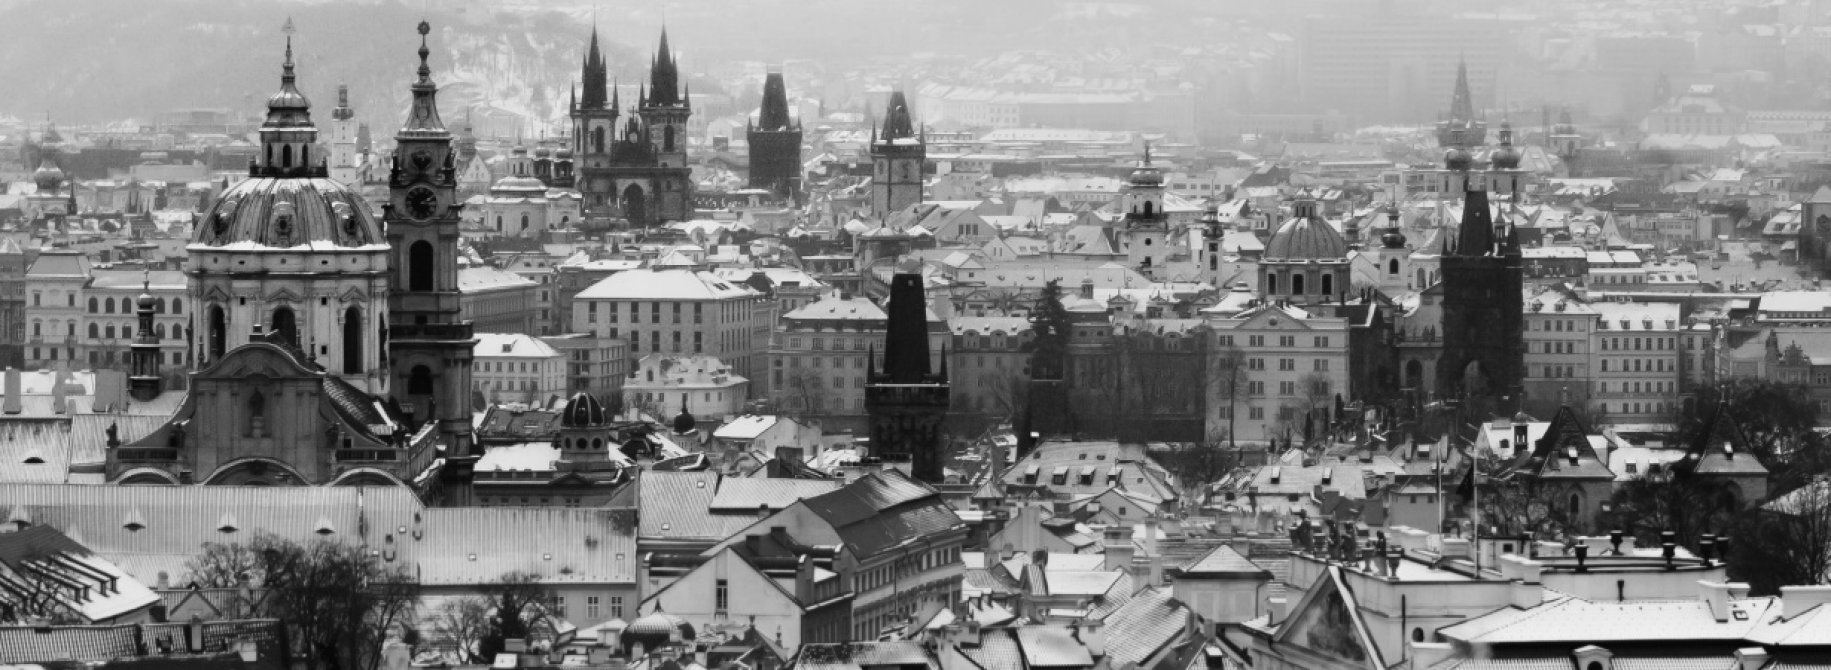 Prague drowned in time